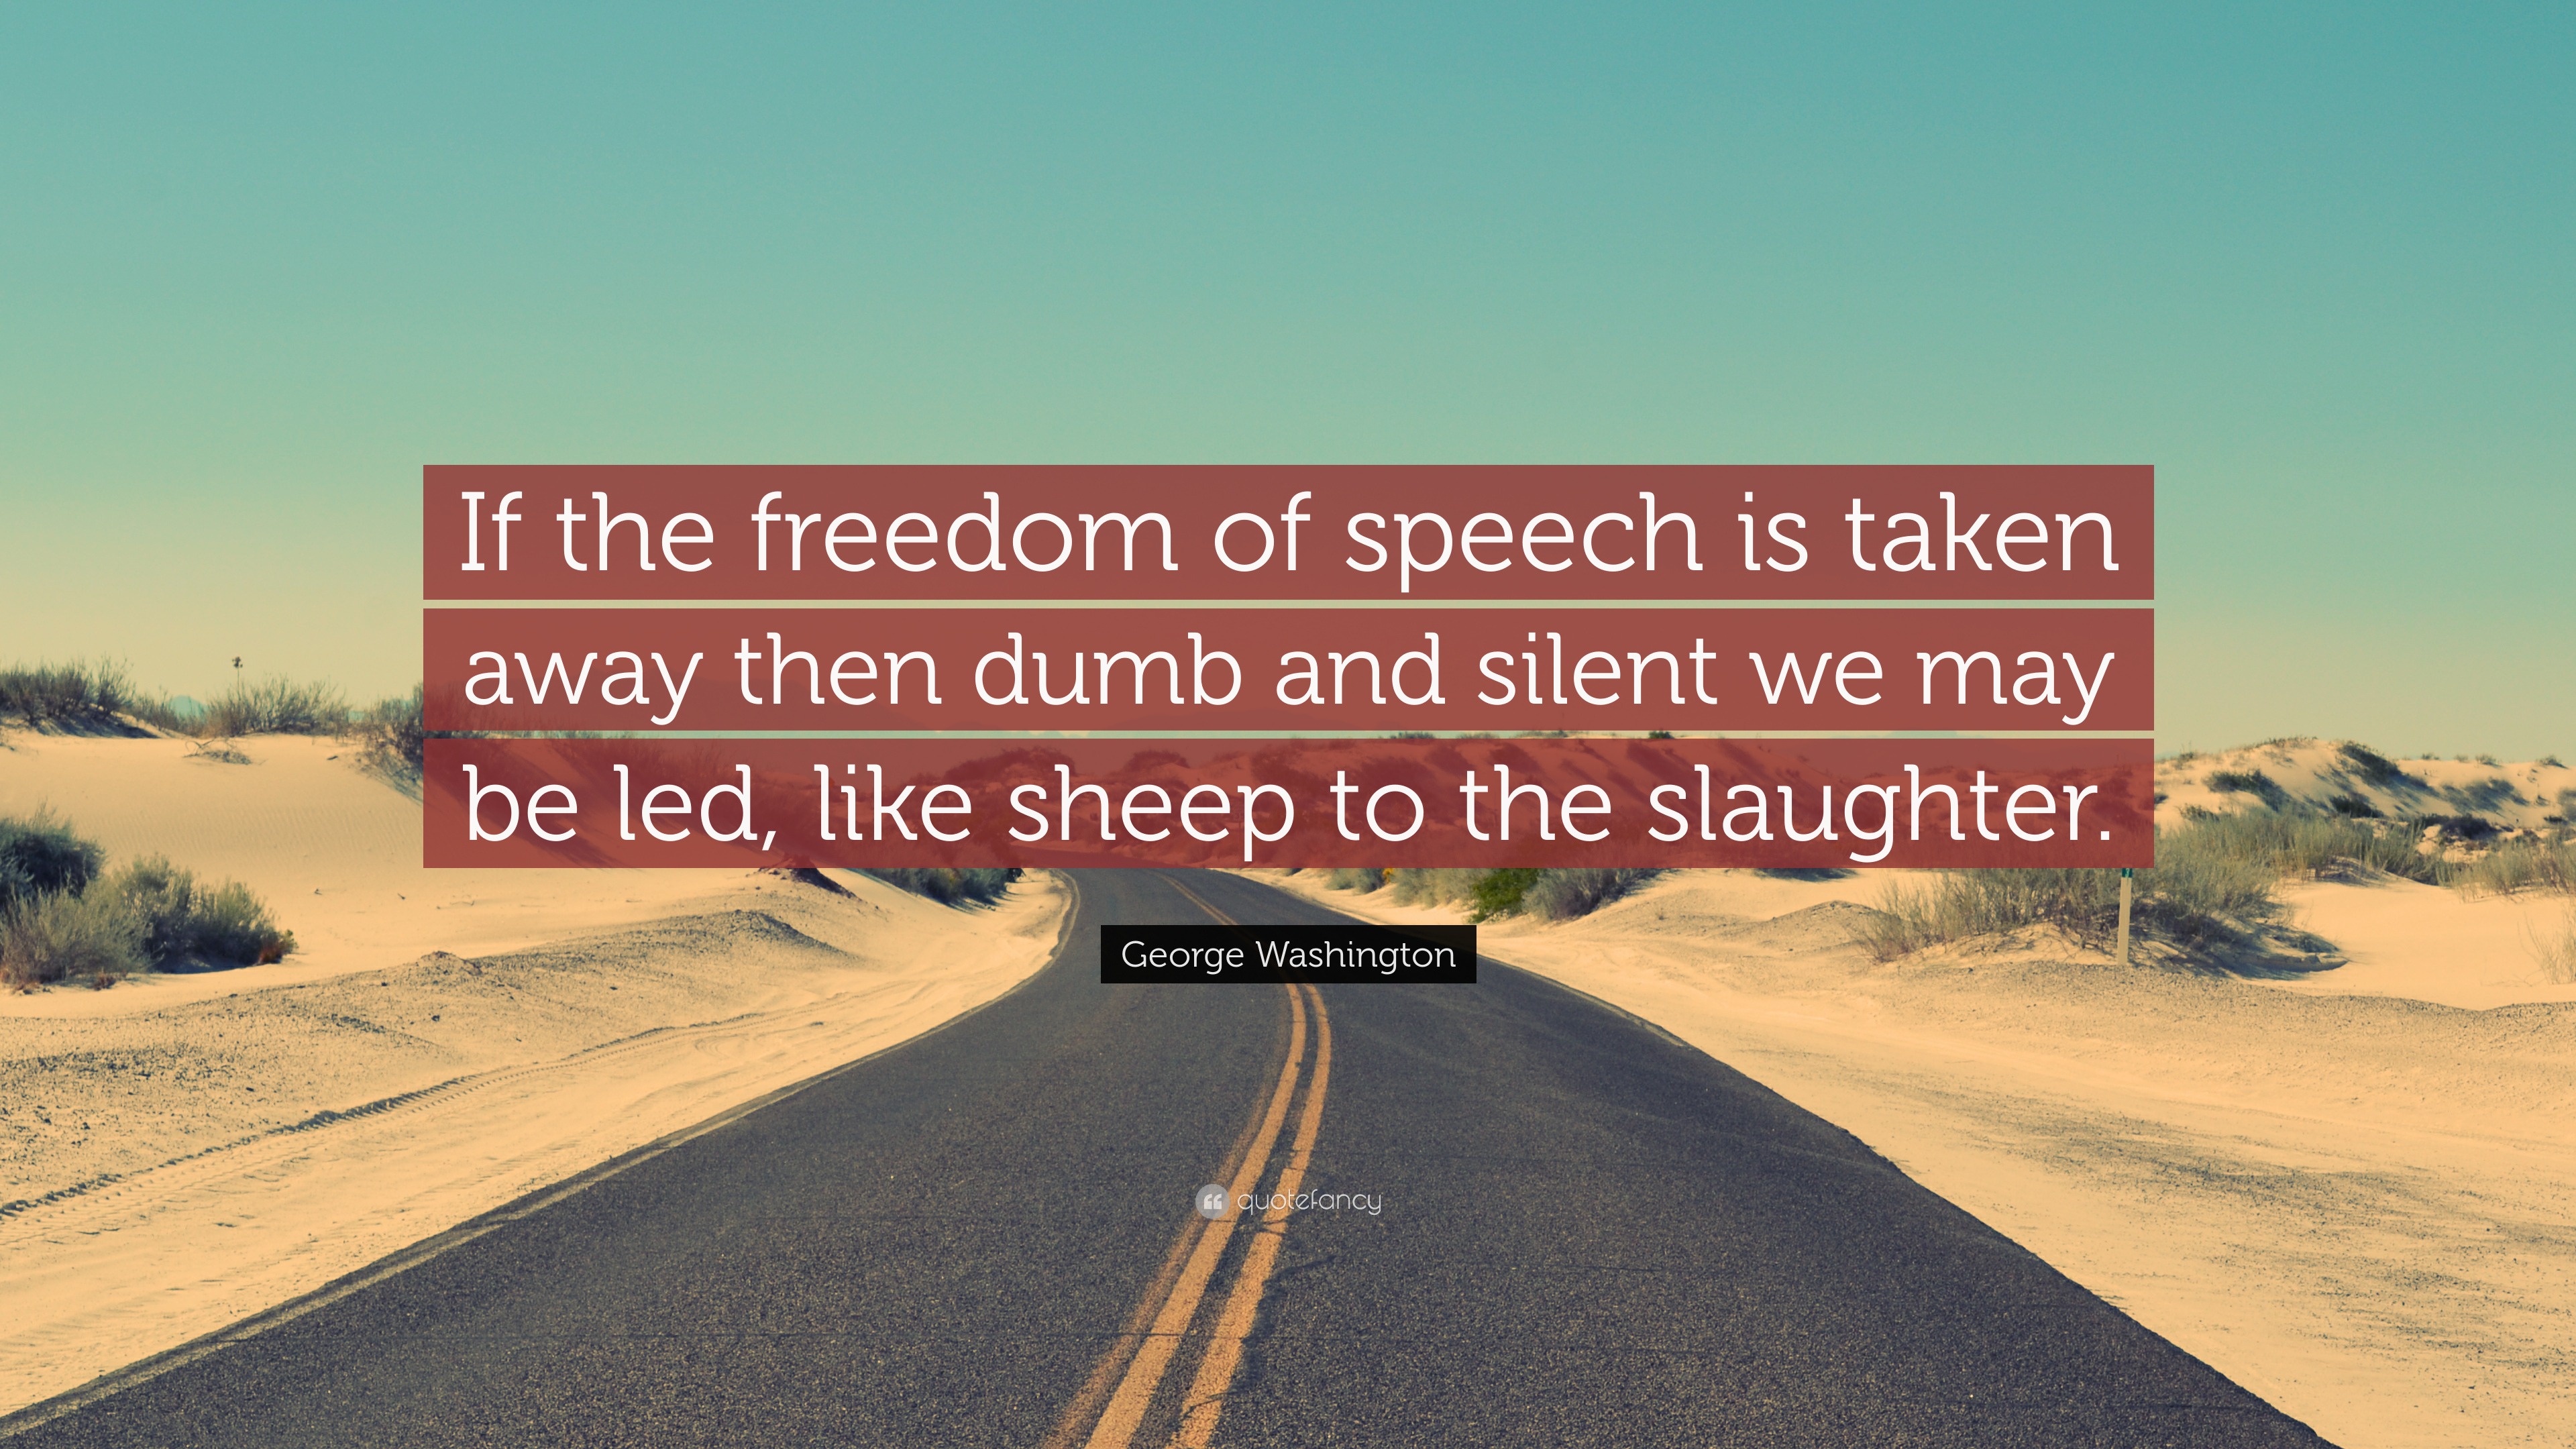 George Washington Quote: “If the freedom of speech is taken away then